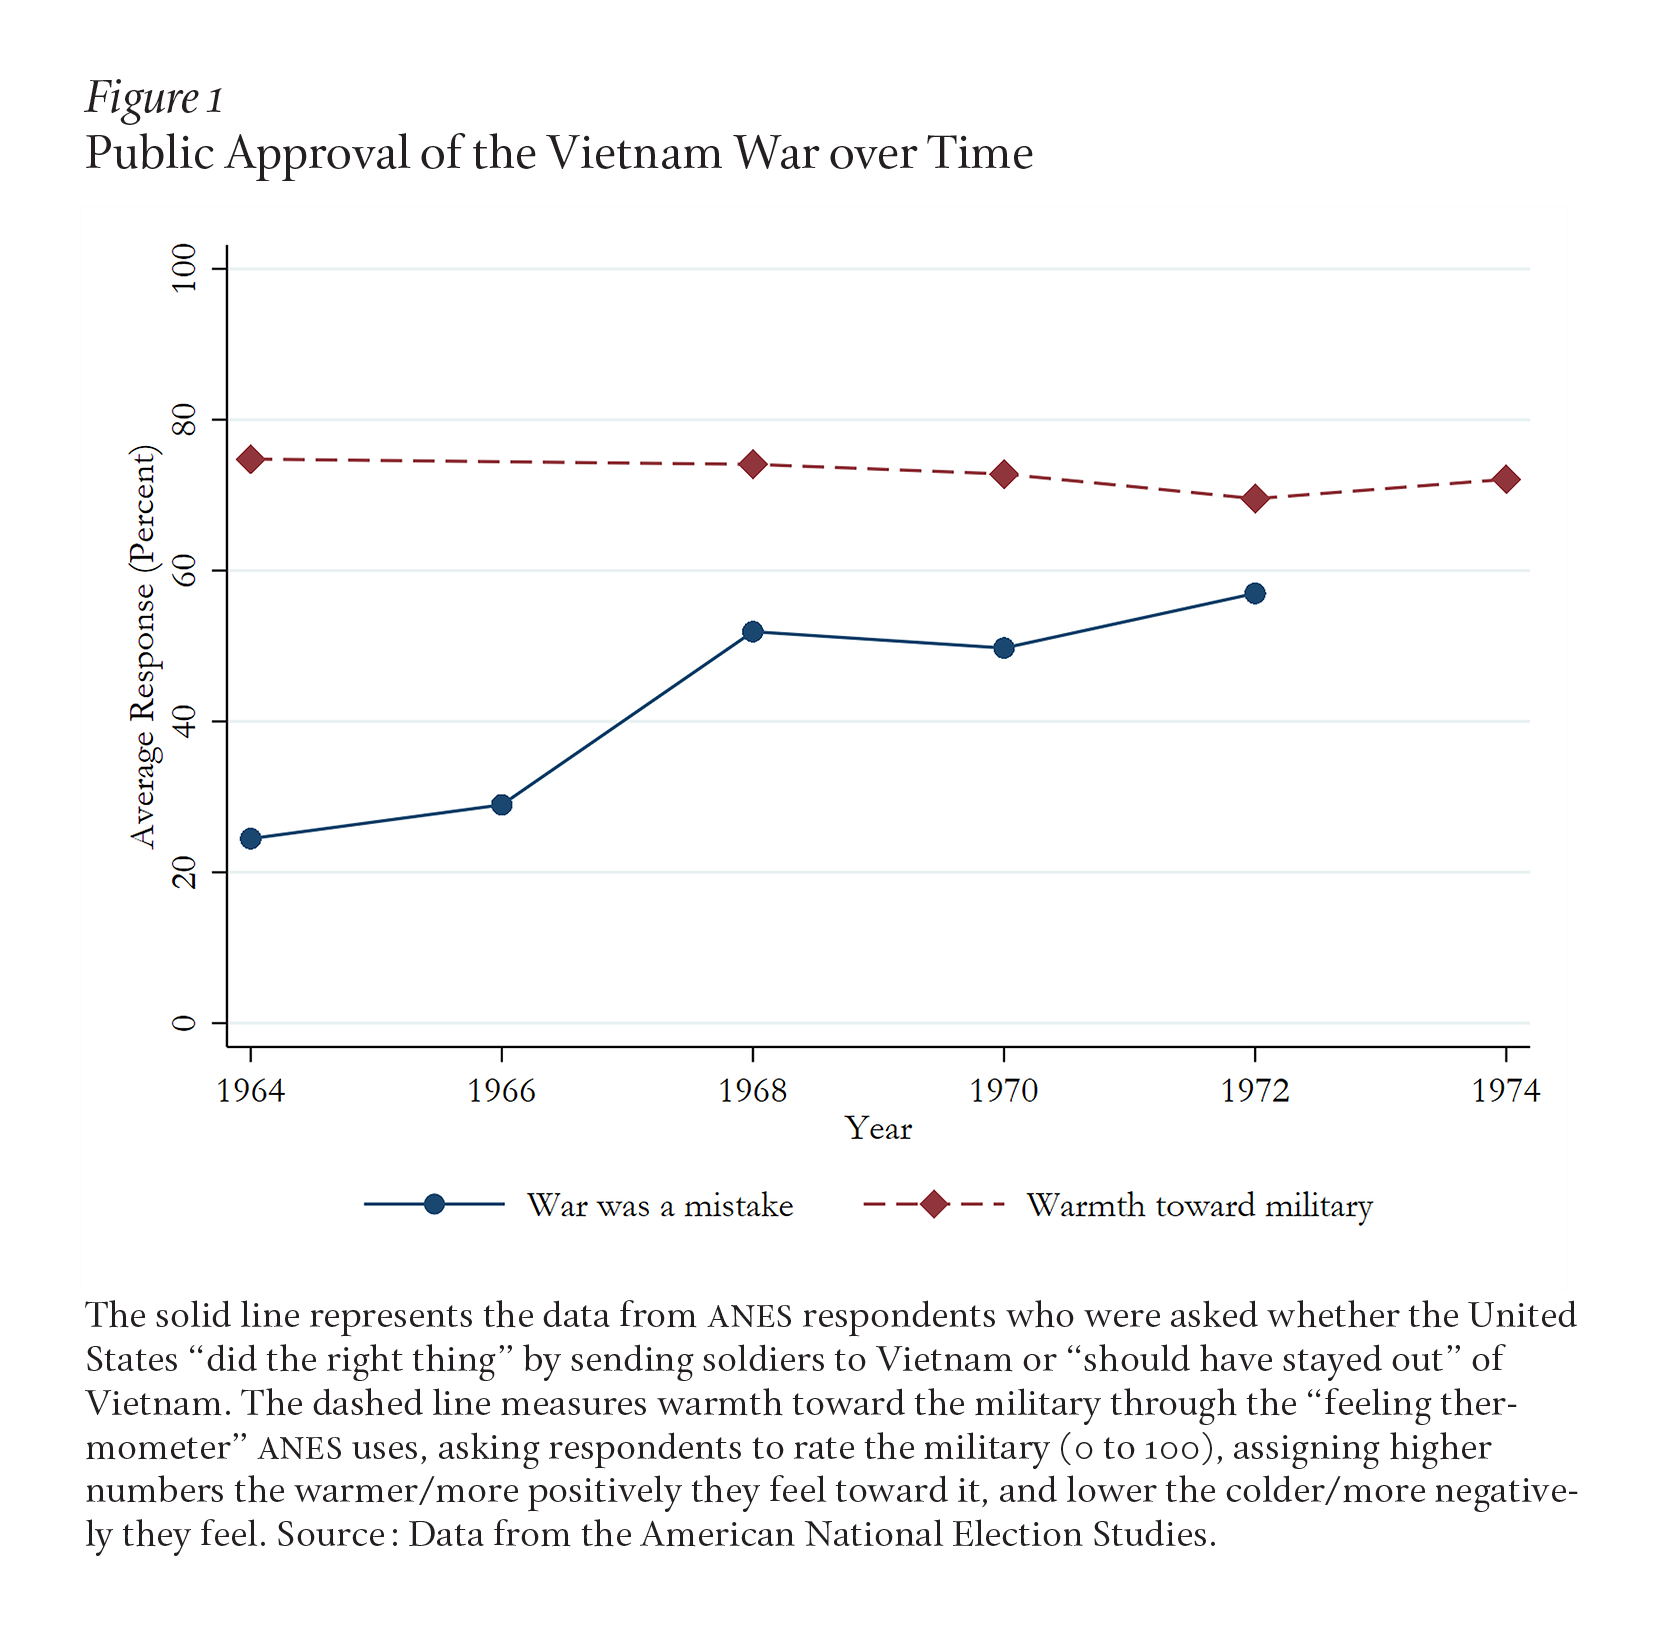 Public approval of the Vietnam War over time, 1964 to 1974. The graph shows that although the number of people who viewed the war as a mistake climbed sharply after 1966, the measure of warmth toward the military stayed fairly consistent throughout the war.